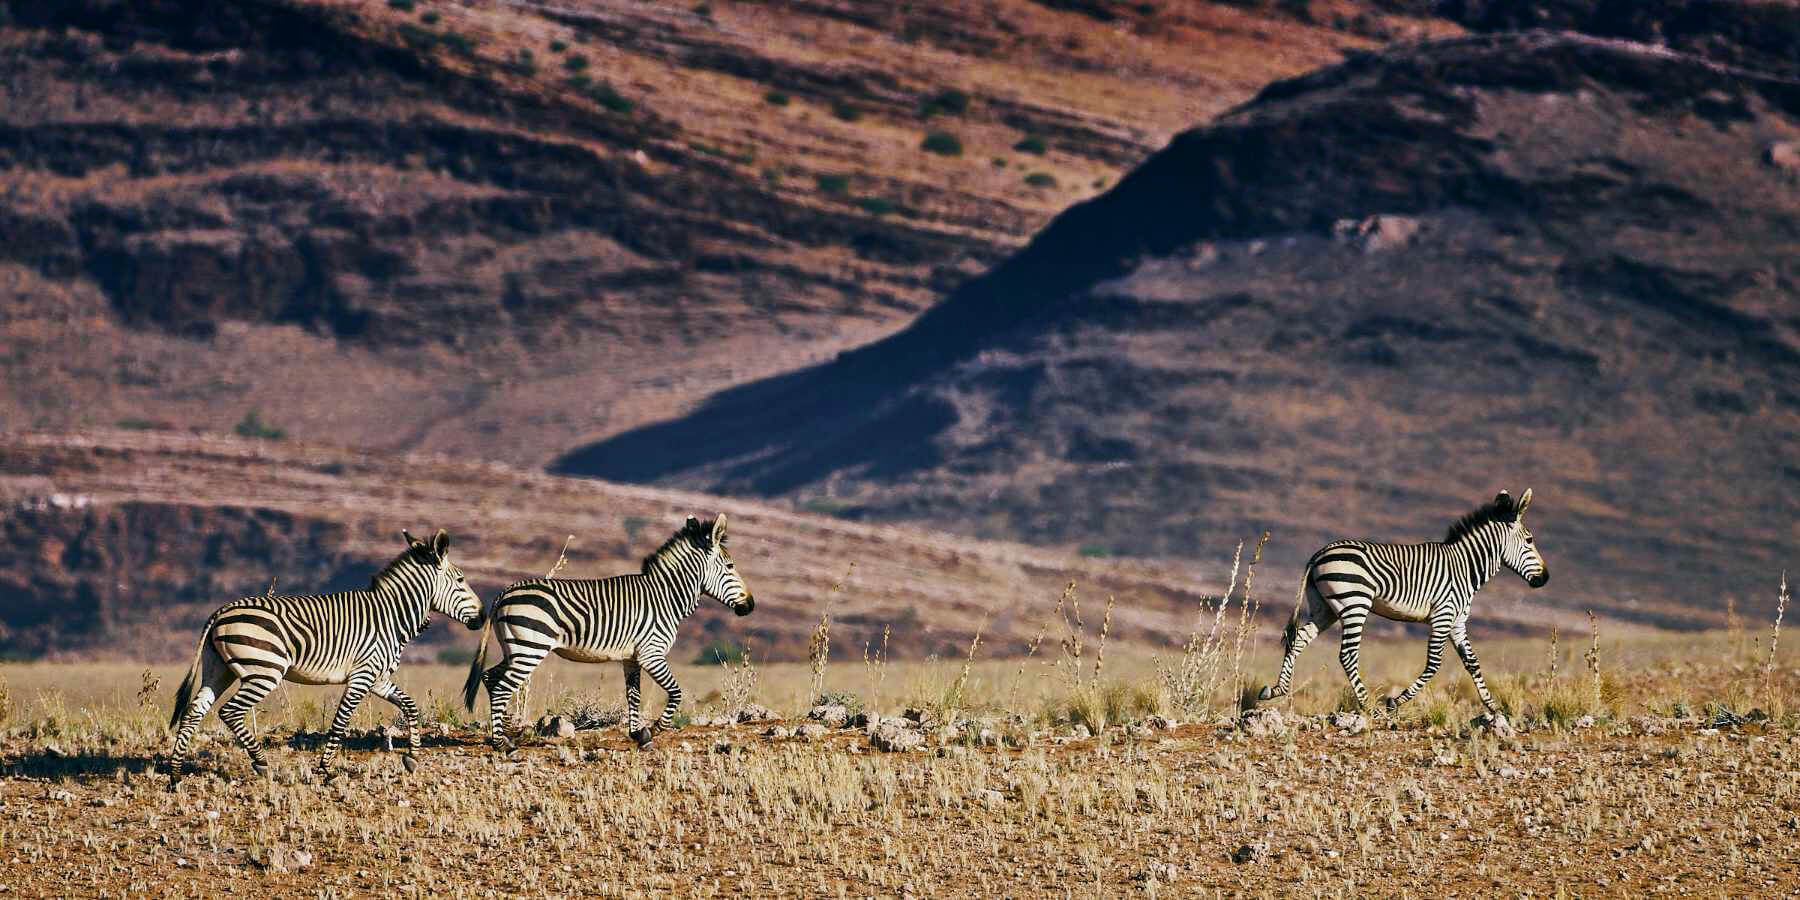 The resilient mountain zebra effortlessly traverses this rugged yet beautiful terrain.